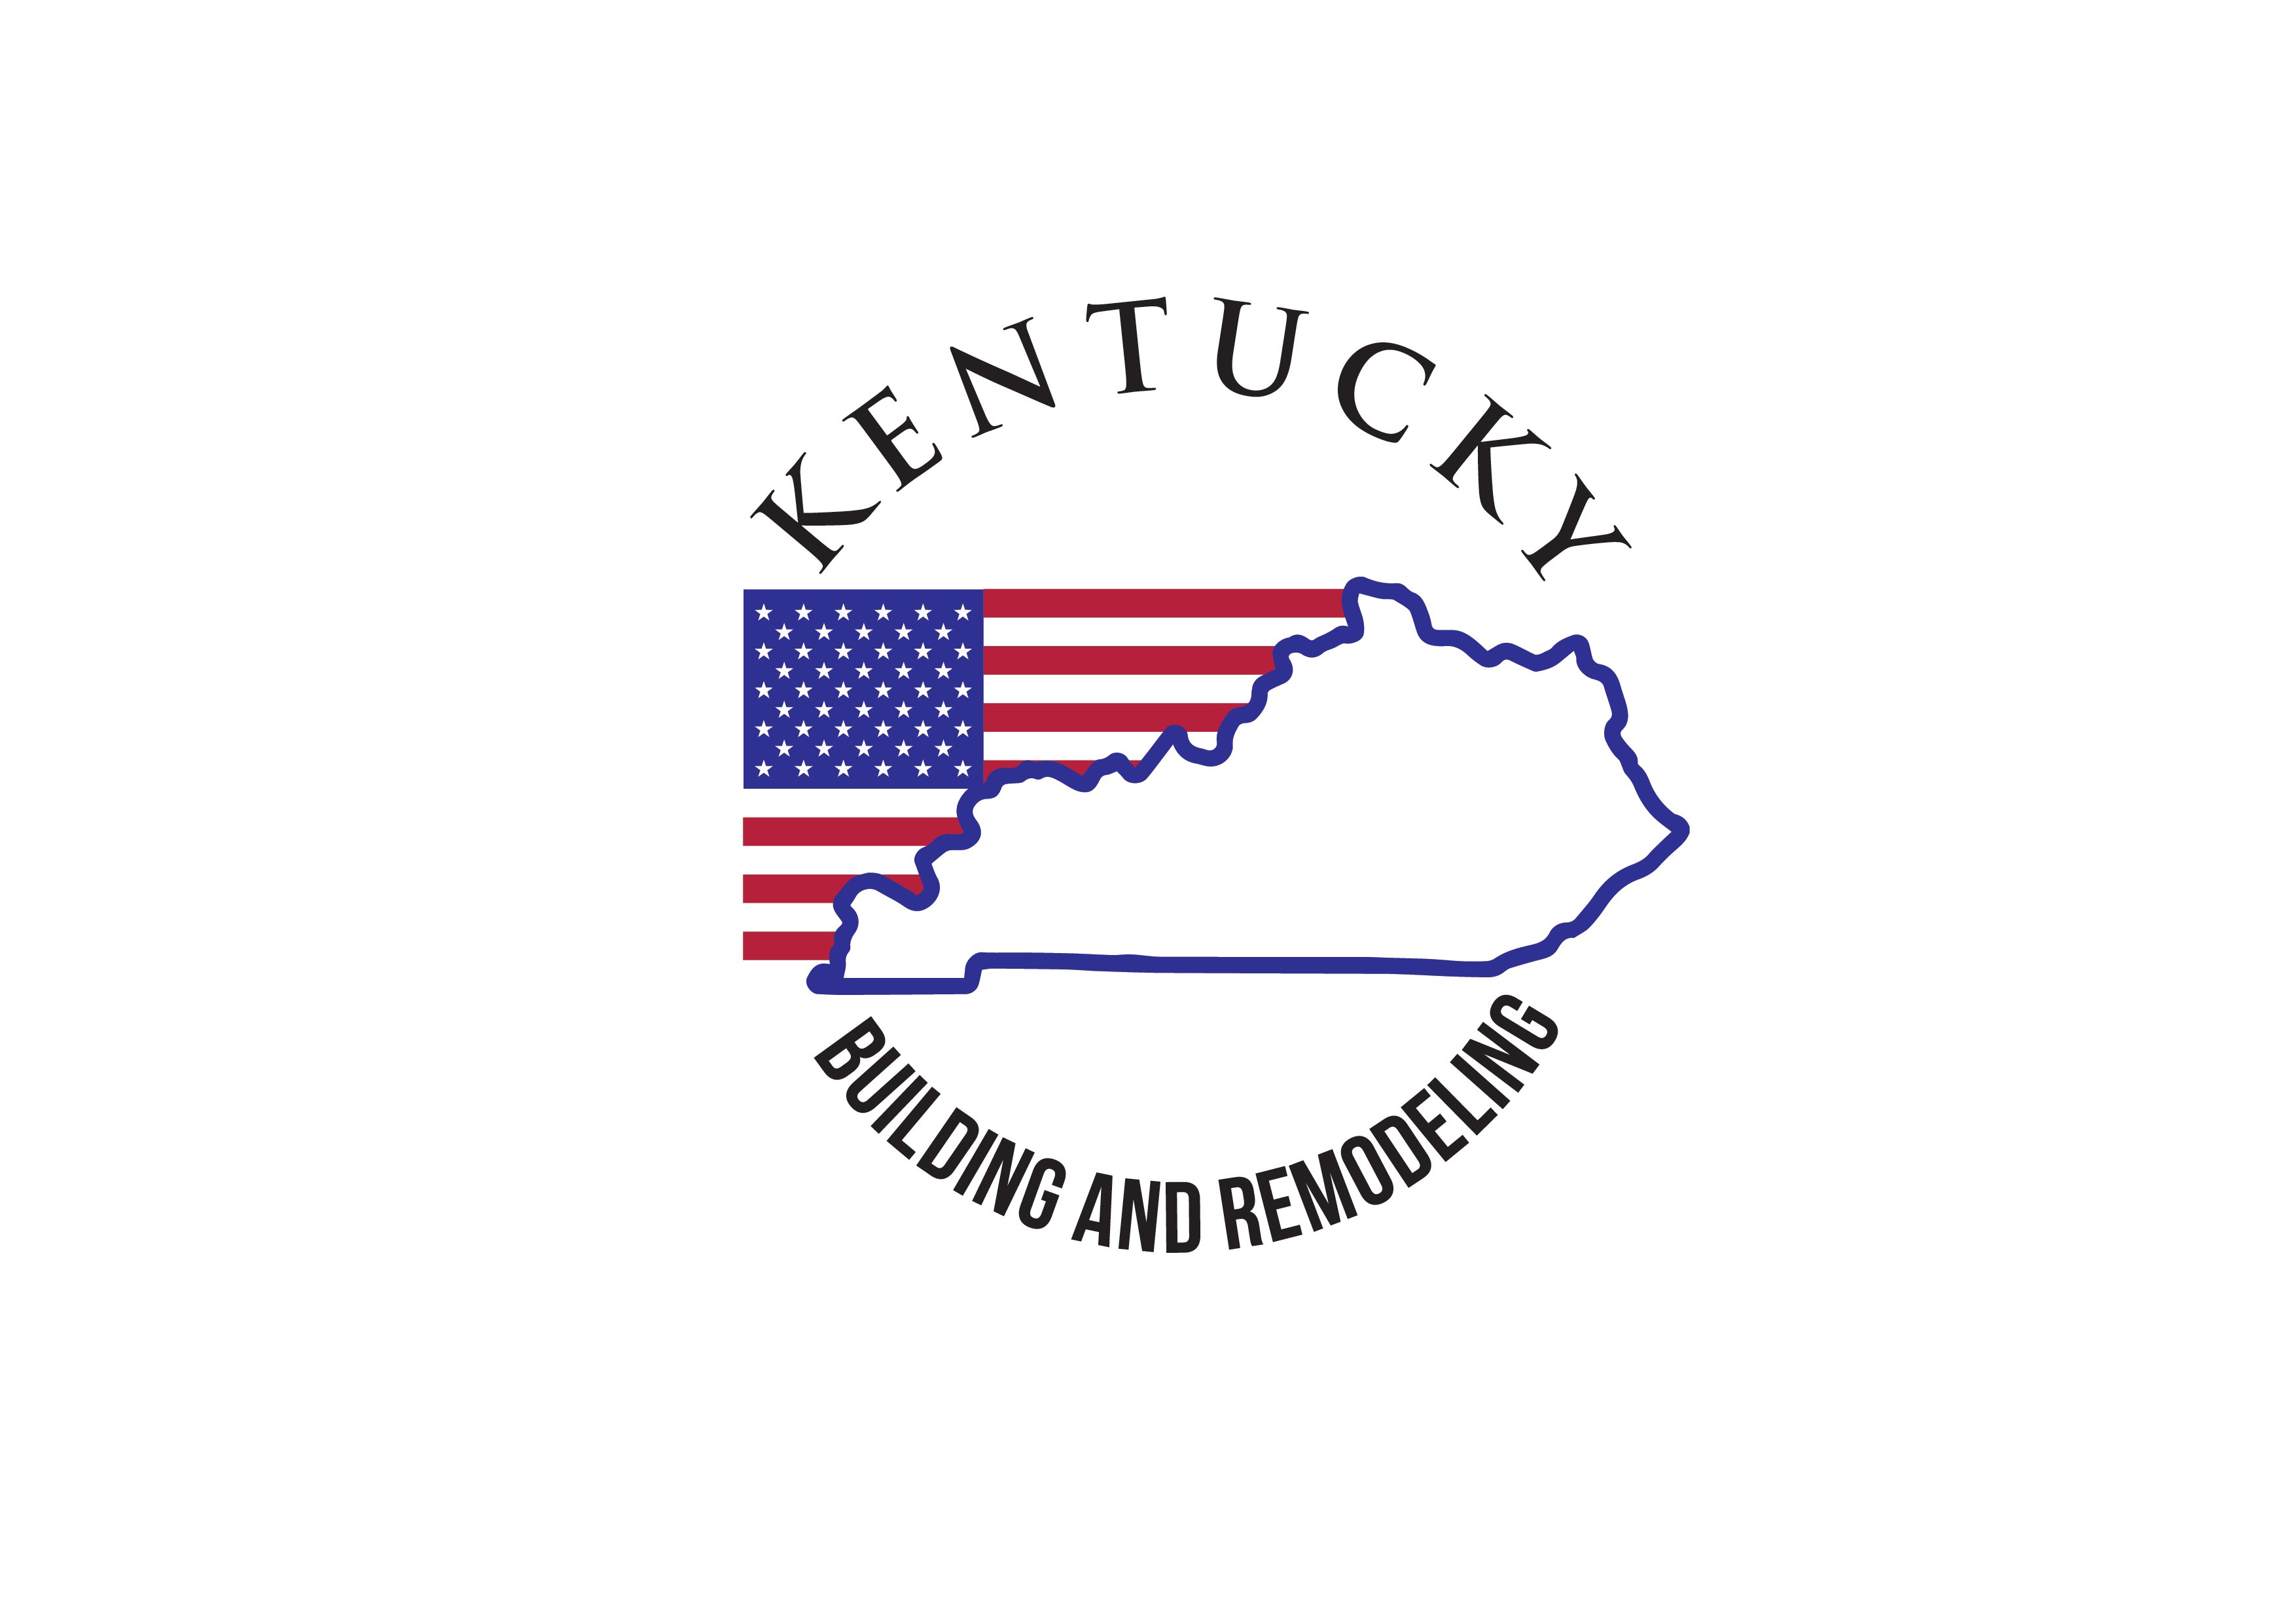 Kentucky Building and Remodeling Logo